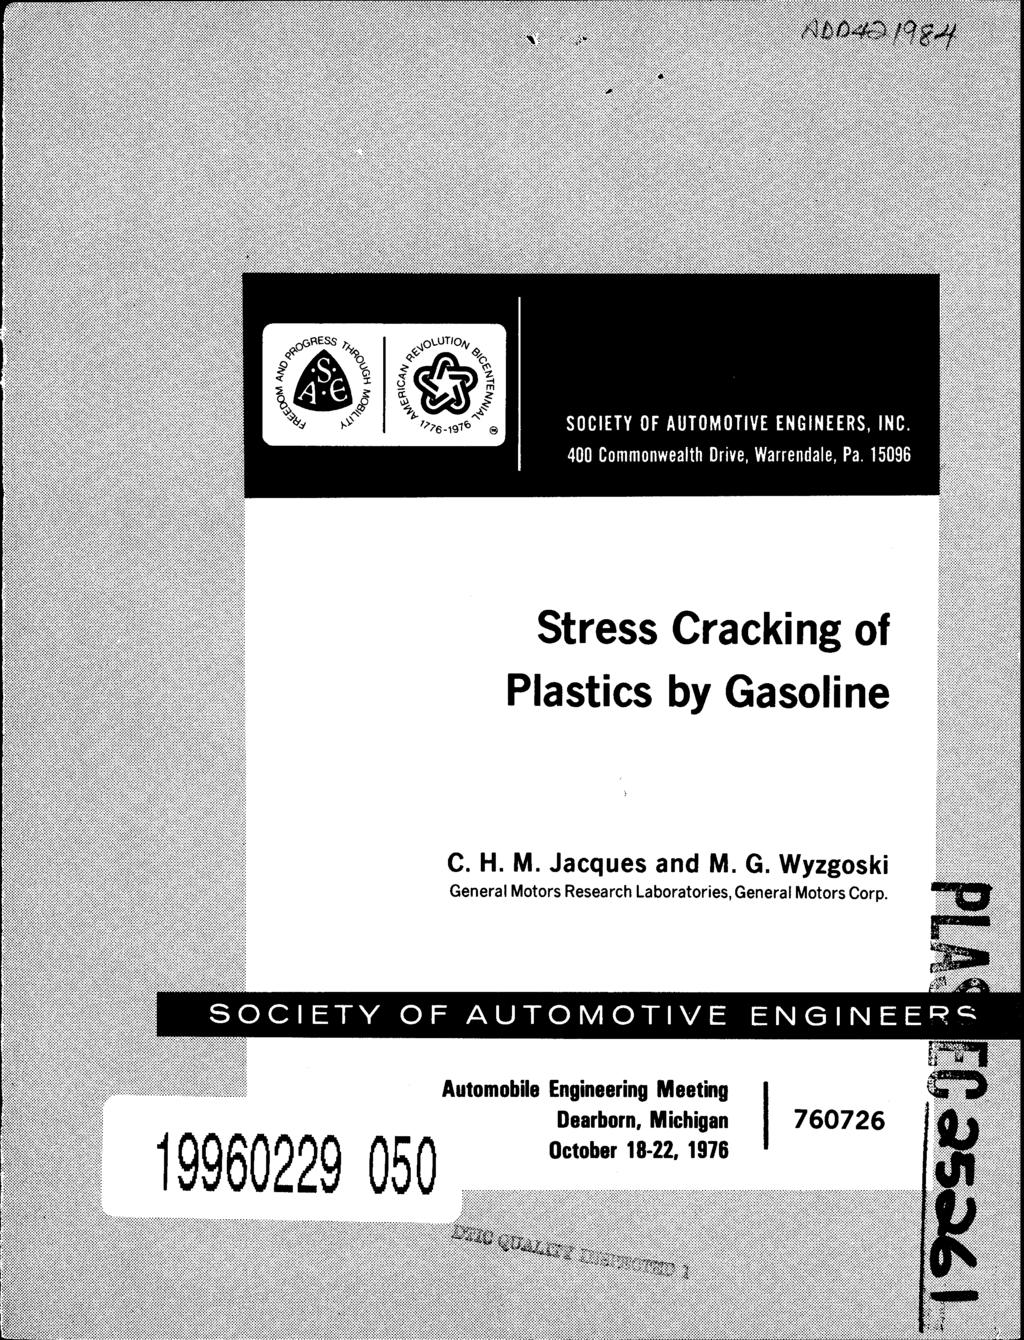 .Cj SOCIETY OF AUTOMOTIVE ENGINEERS, INC. 400 Cmmnwealth Drive, Warrendale, Pa. 15096 Stress Cracking f Plastics by Gasline C. H. M. Jacques and M. G. Wyzgski General Mtrs Research Labratries, General Mtrs Crp.